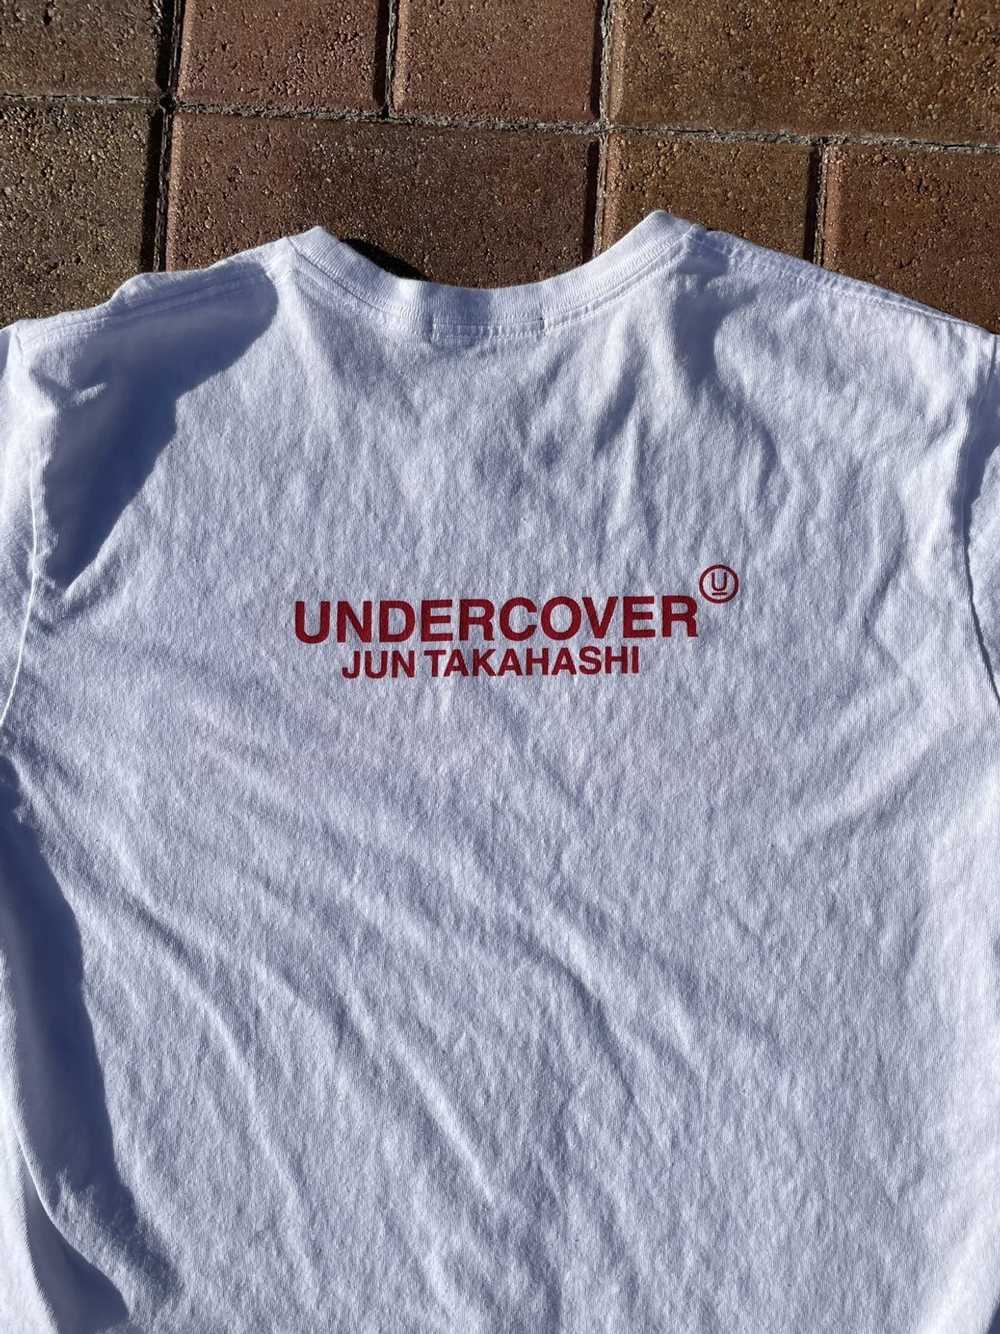 Undercover Undercover Chaos Balance T-shirt Size 3 - image 4